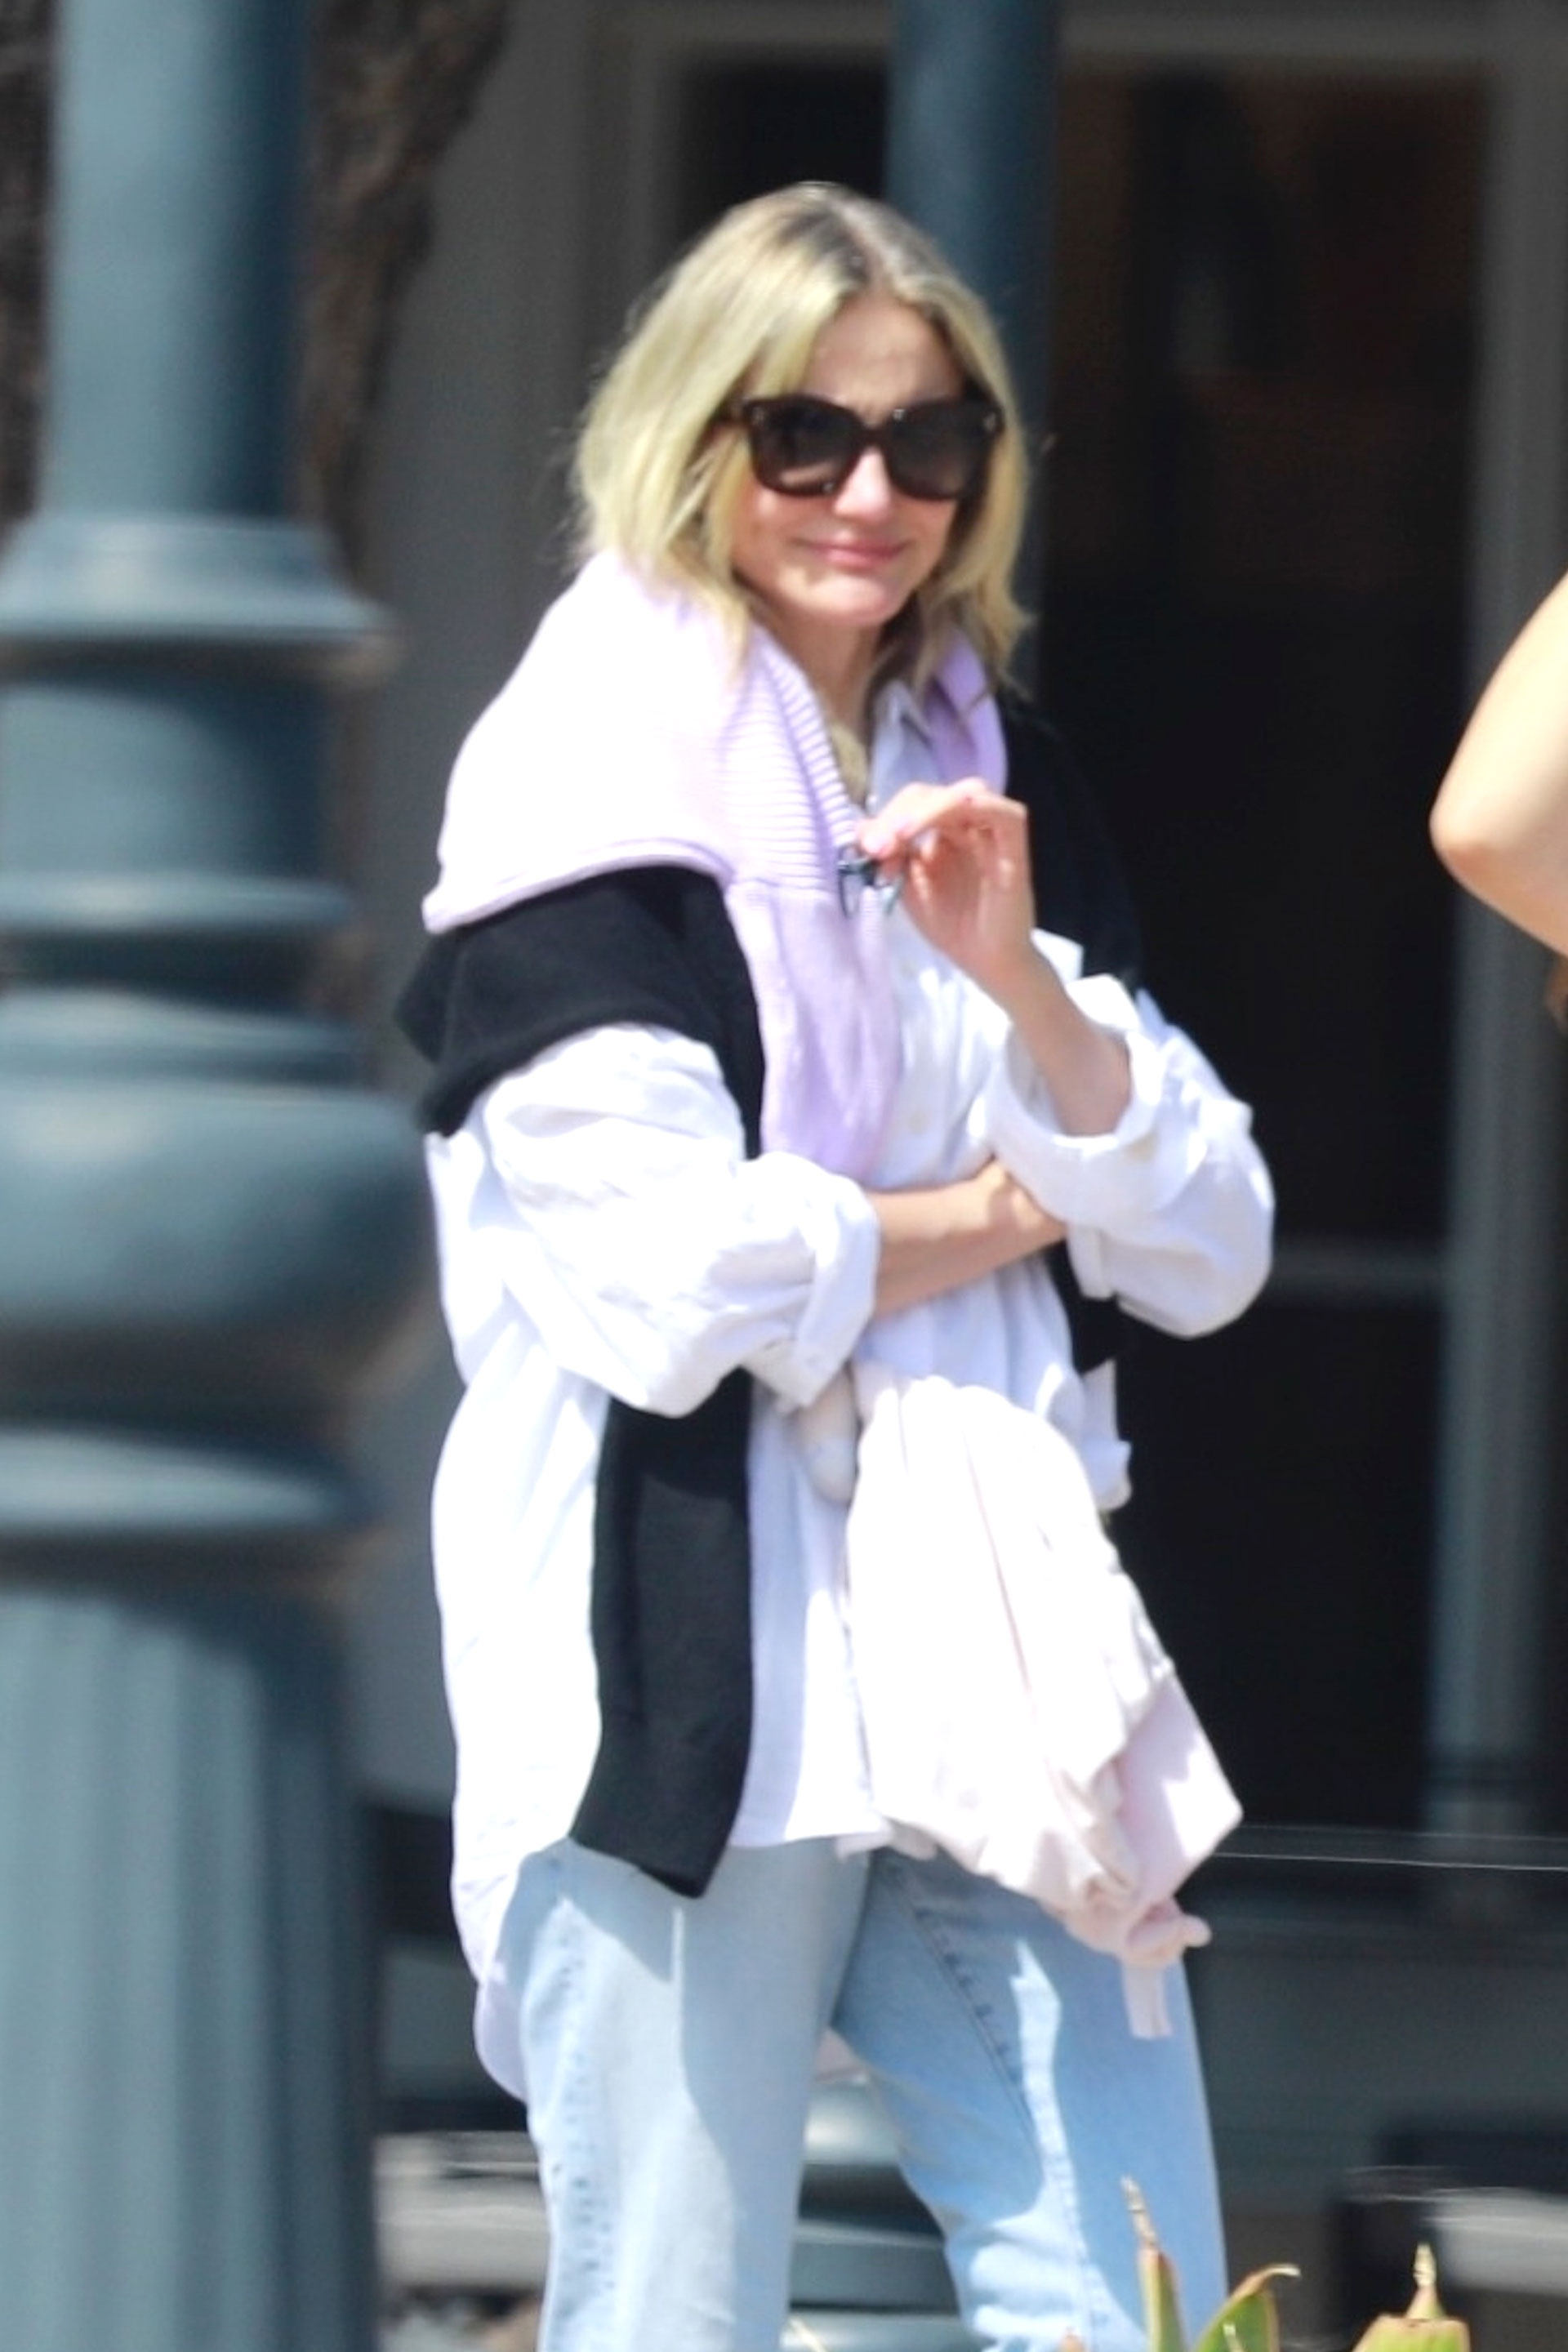 Cameron Diaz and one of her last images: in Malibu in late July, after lunch with her husband and daughter (Photo: The Grosby Group)